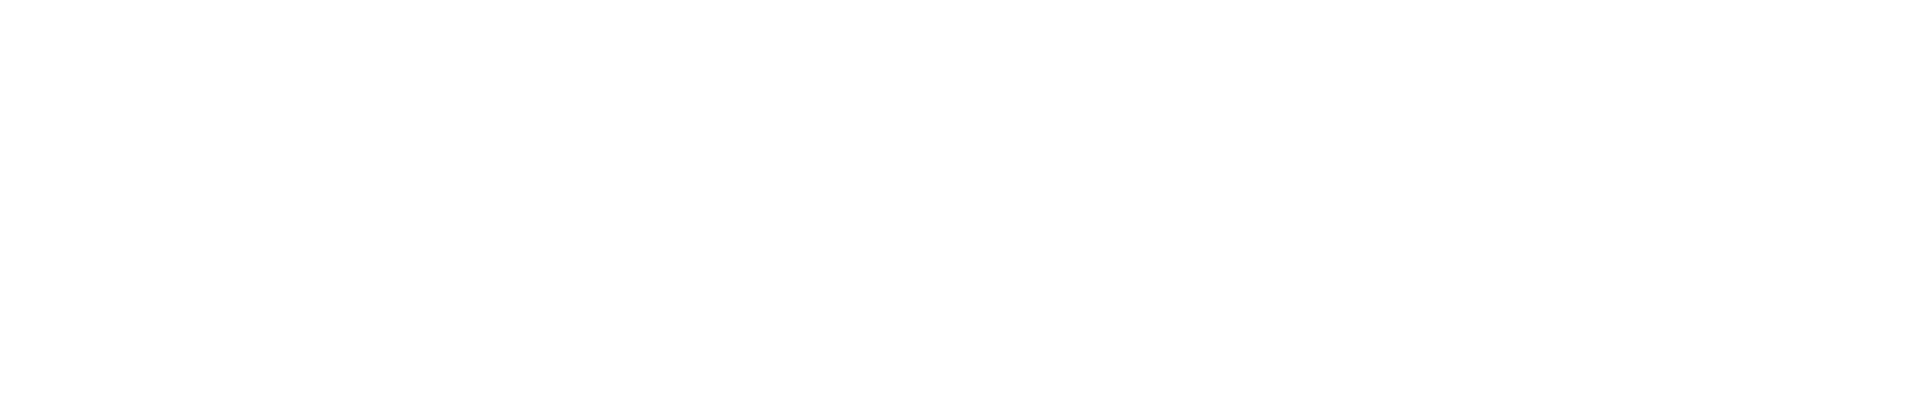 Recovery, Transformation and Resiliency Plan